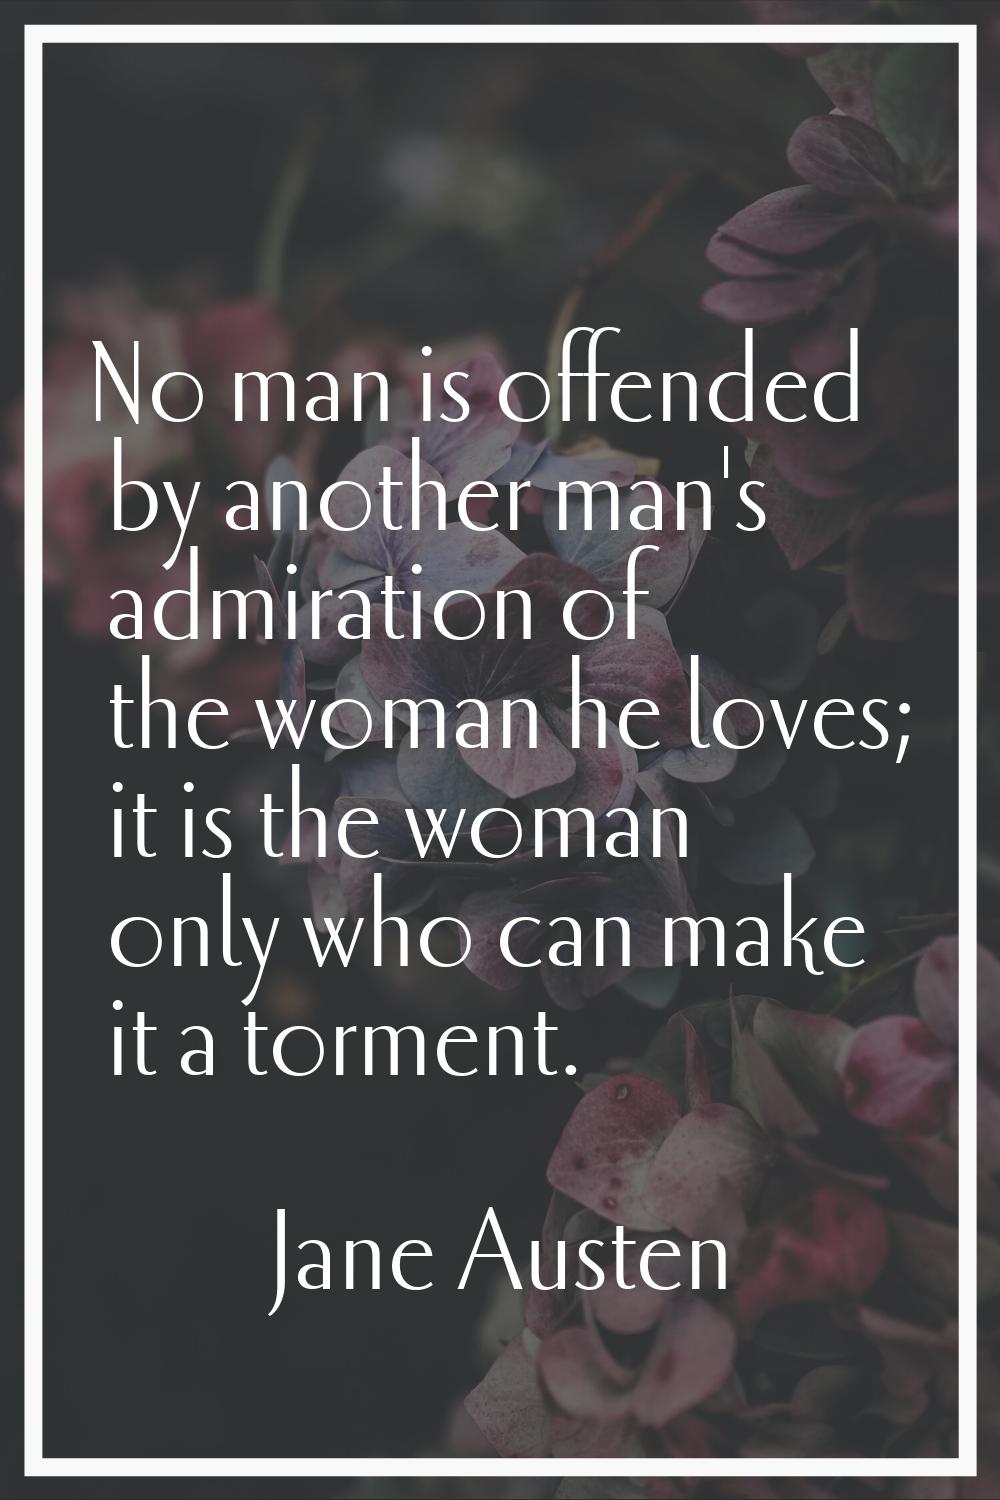 No man is offended by another man's admiration of the woman he loves; it is the woman only who can 